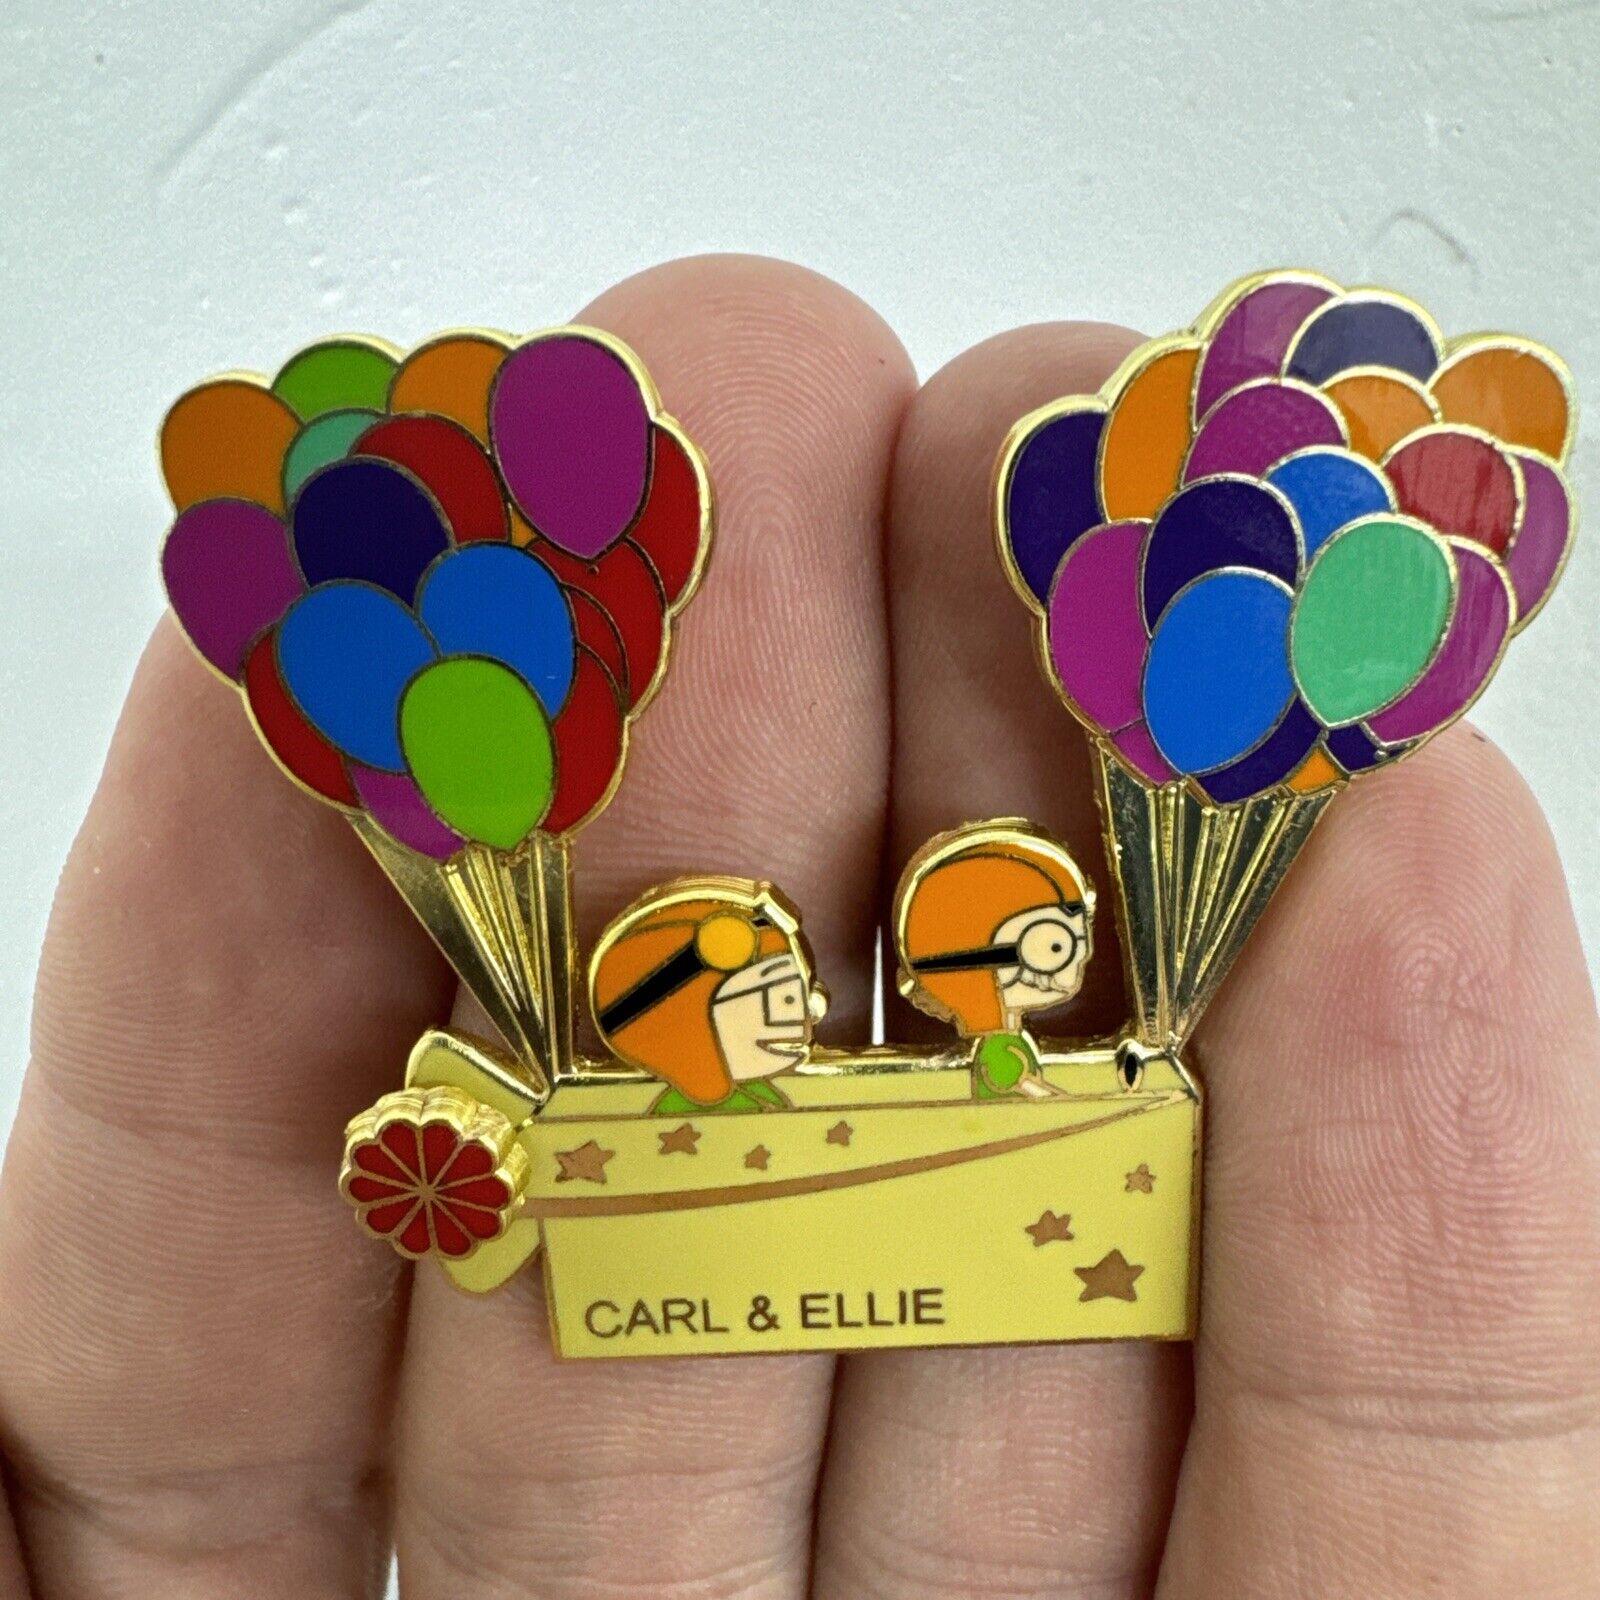 Disney Fantasy Up Carl and Ellie Pin Super Rare Limited Edition 30